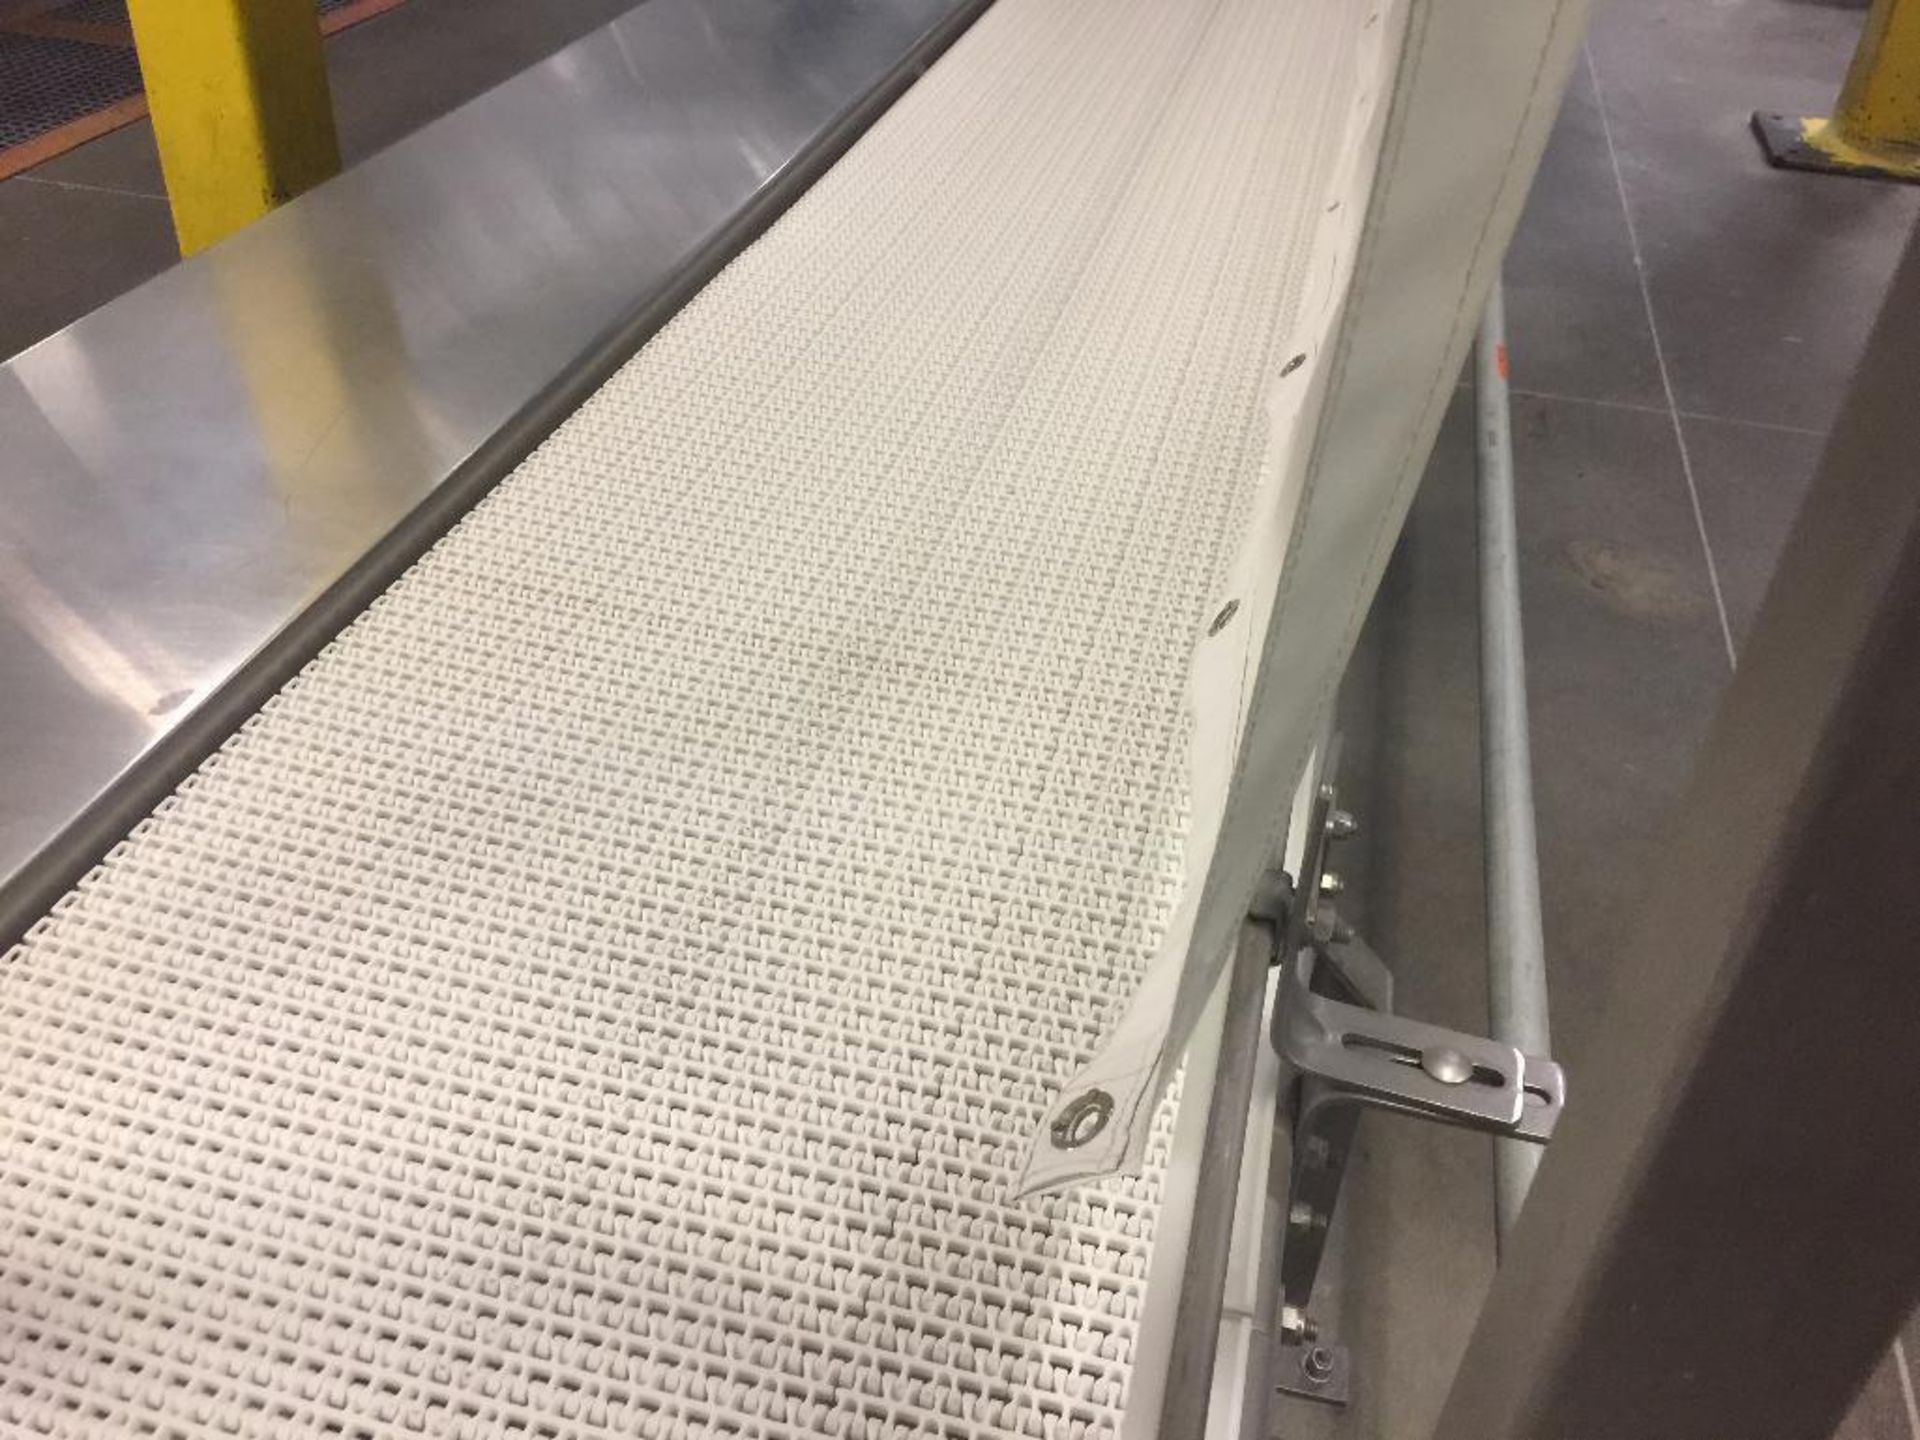 SS pack of conveyor, 18 ft. x 16 in. overall, 3 levels, top is gravity empty box conveyor, middle is - Image 3 of 3